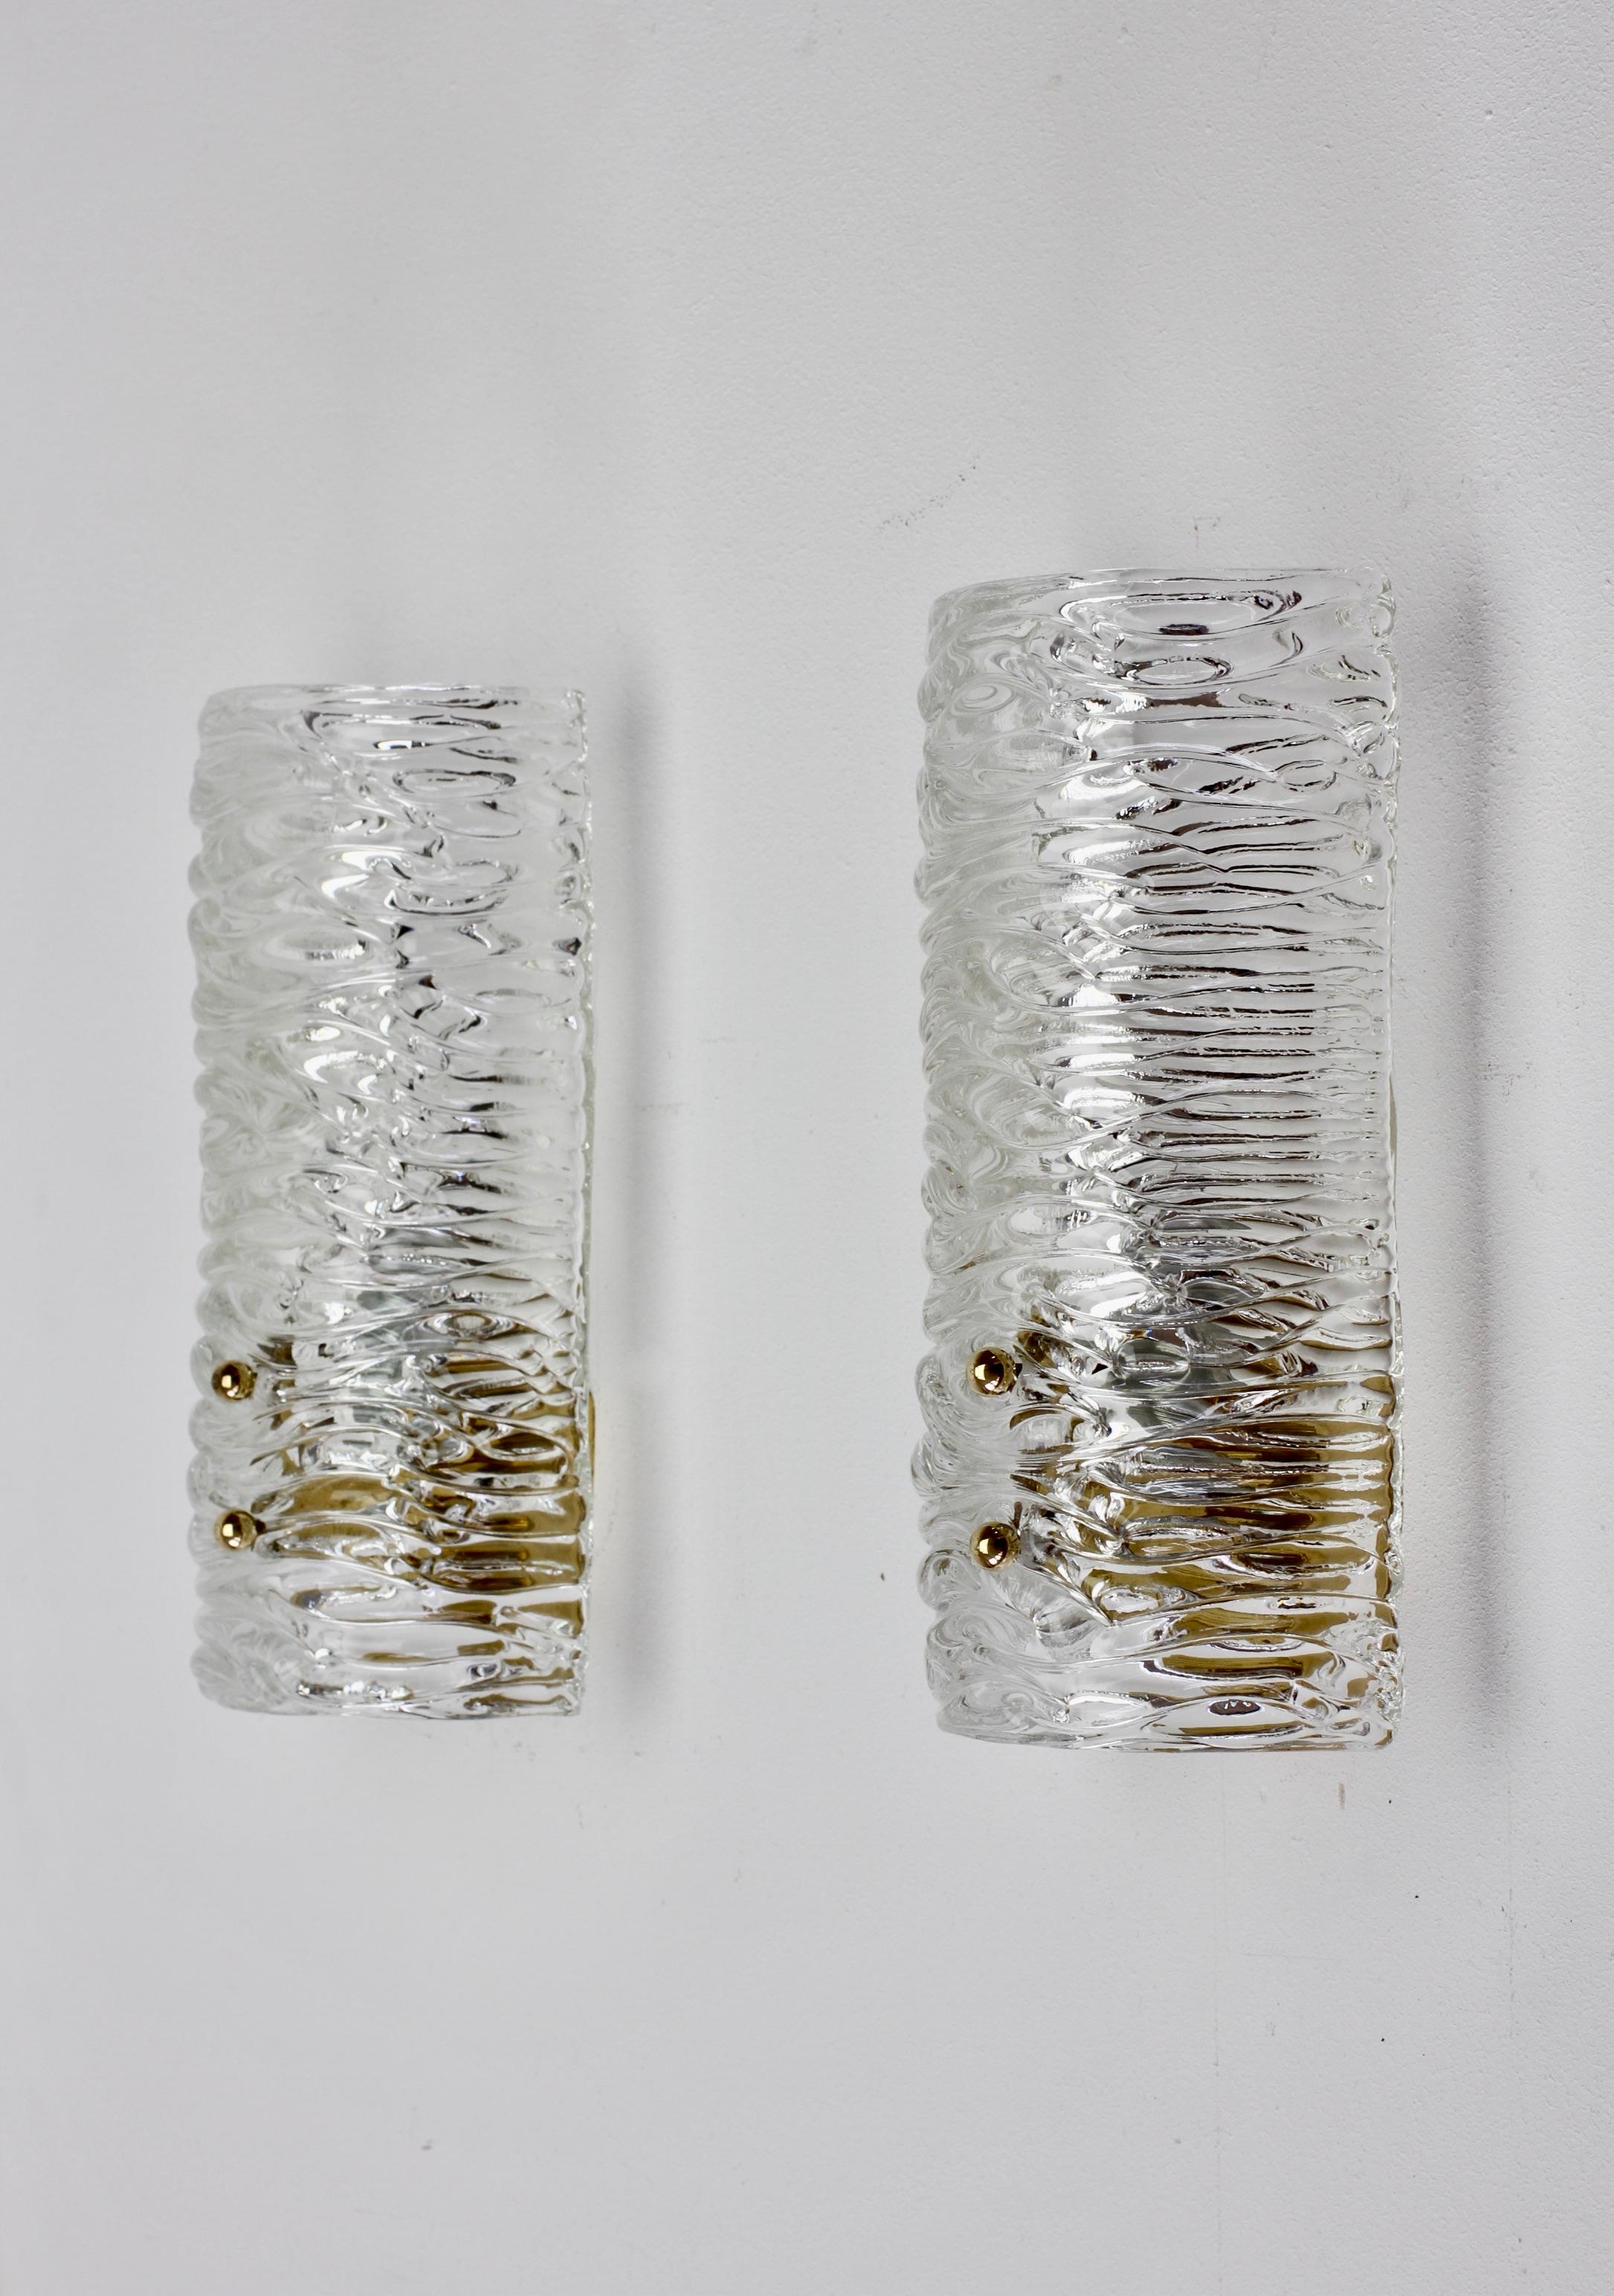 Pair of large elegant vintage midcentury Austrian made wall lights, lamps or sconces by J.T. Kalmar, circa 1955-1965. Featuring wonderful large curved sheet of textured / structured glass (similar to the type of clear glass seen on Rupert Nikoll